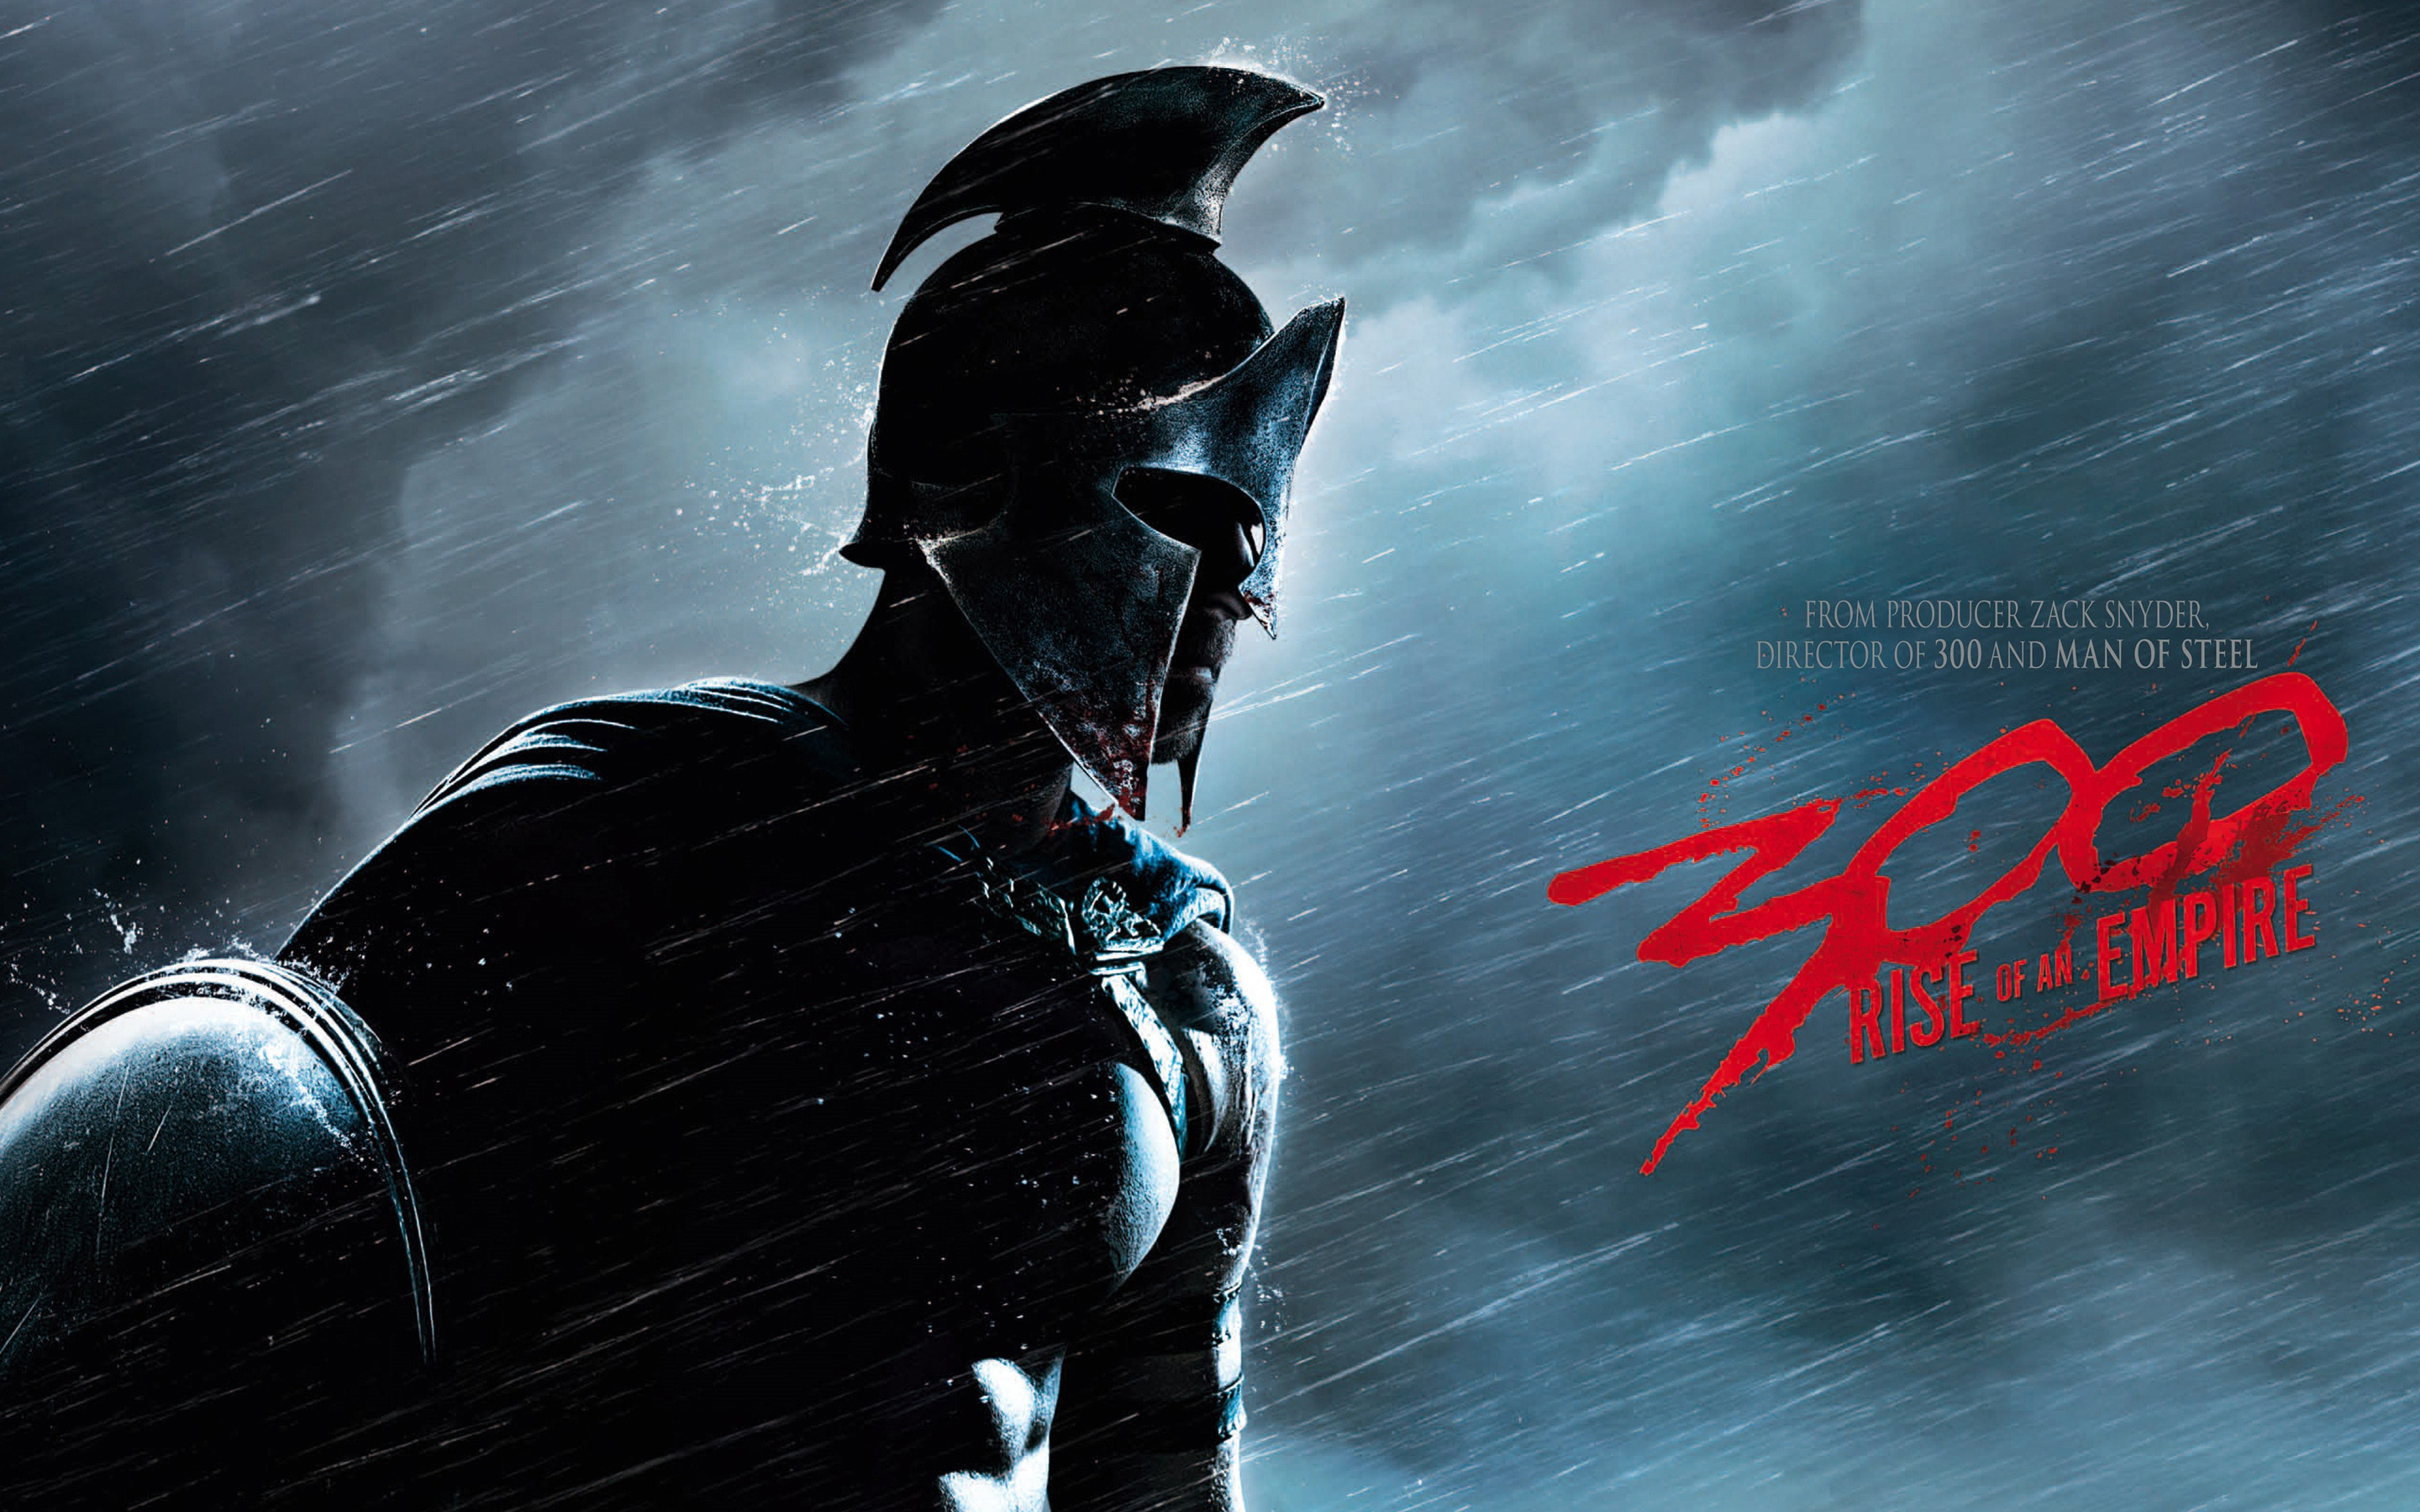 2880x1800 300 Rise of an Empire Movie